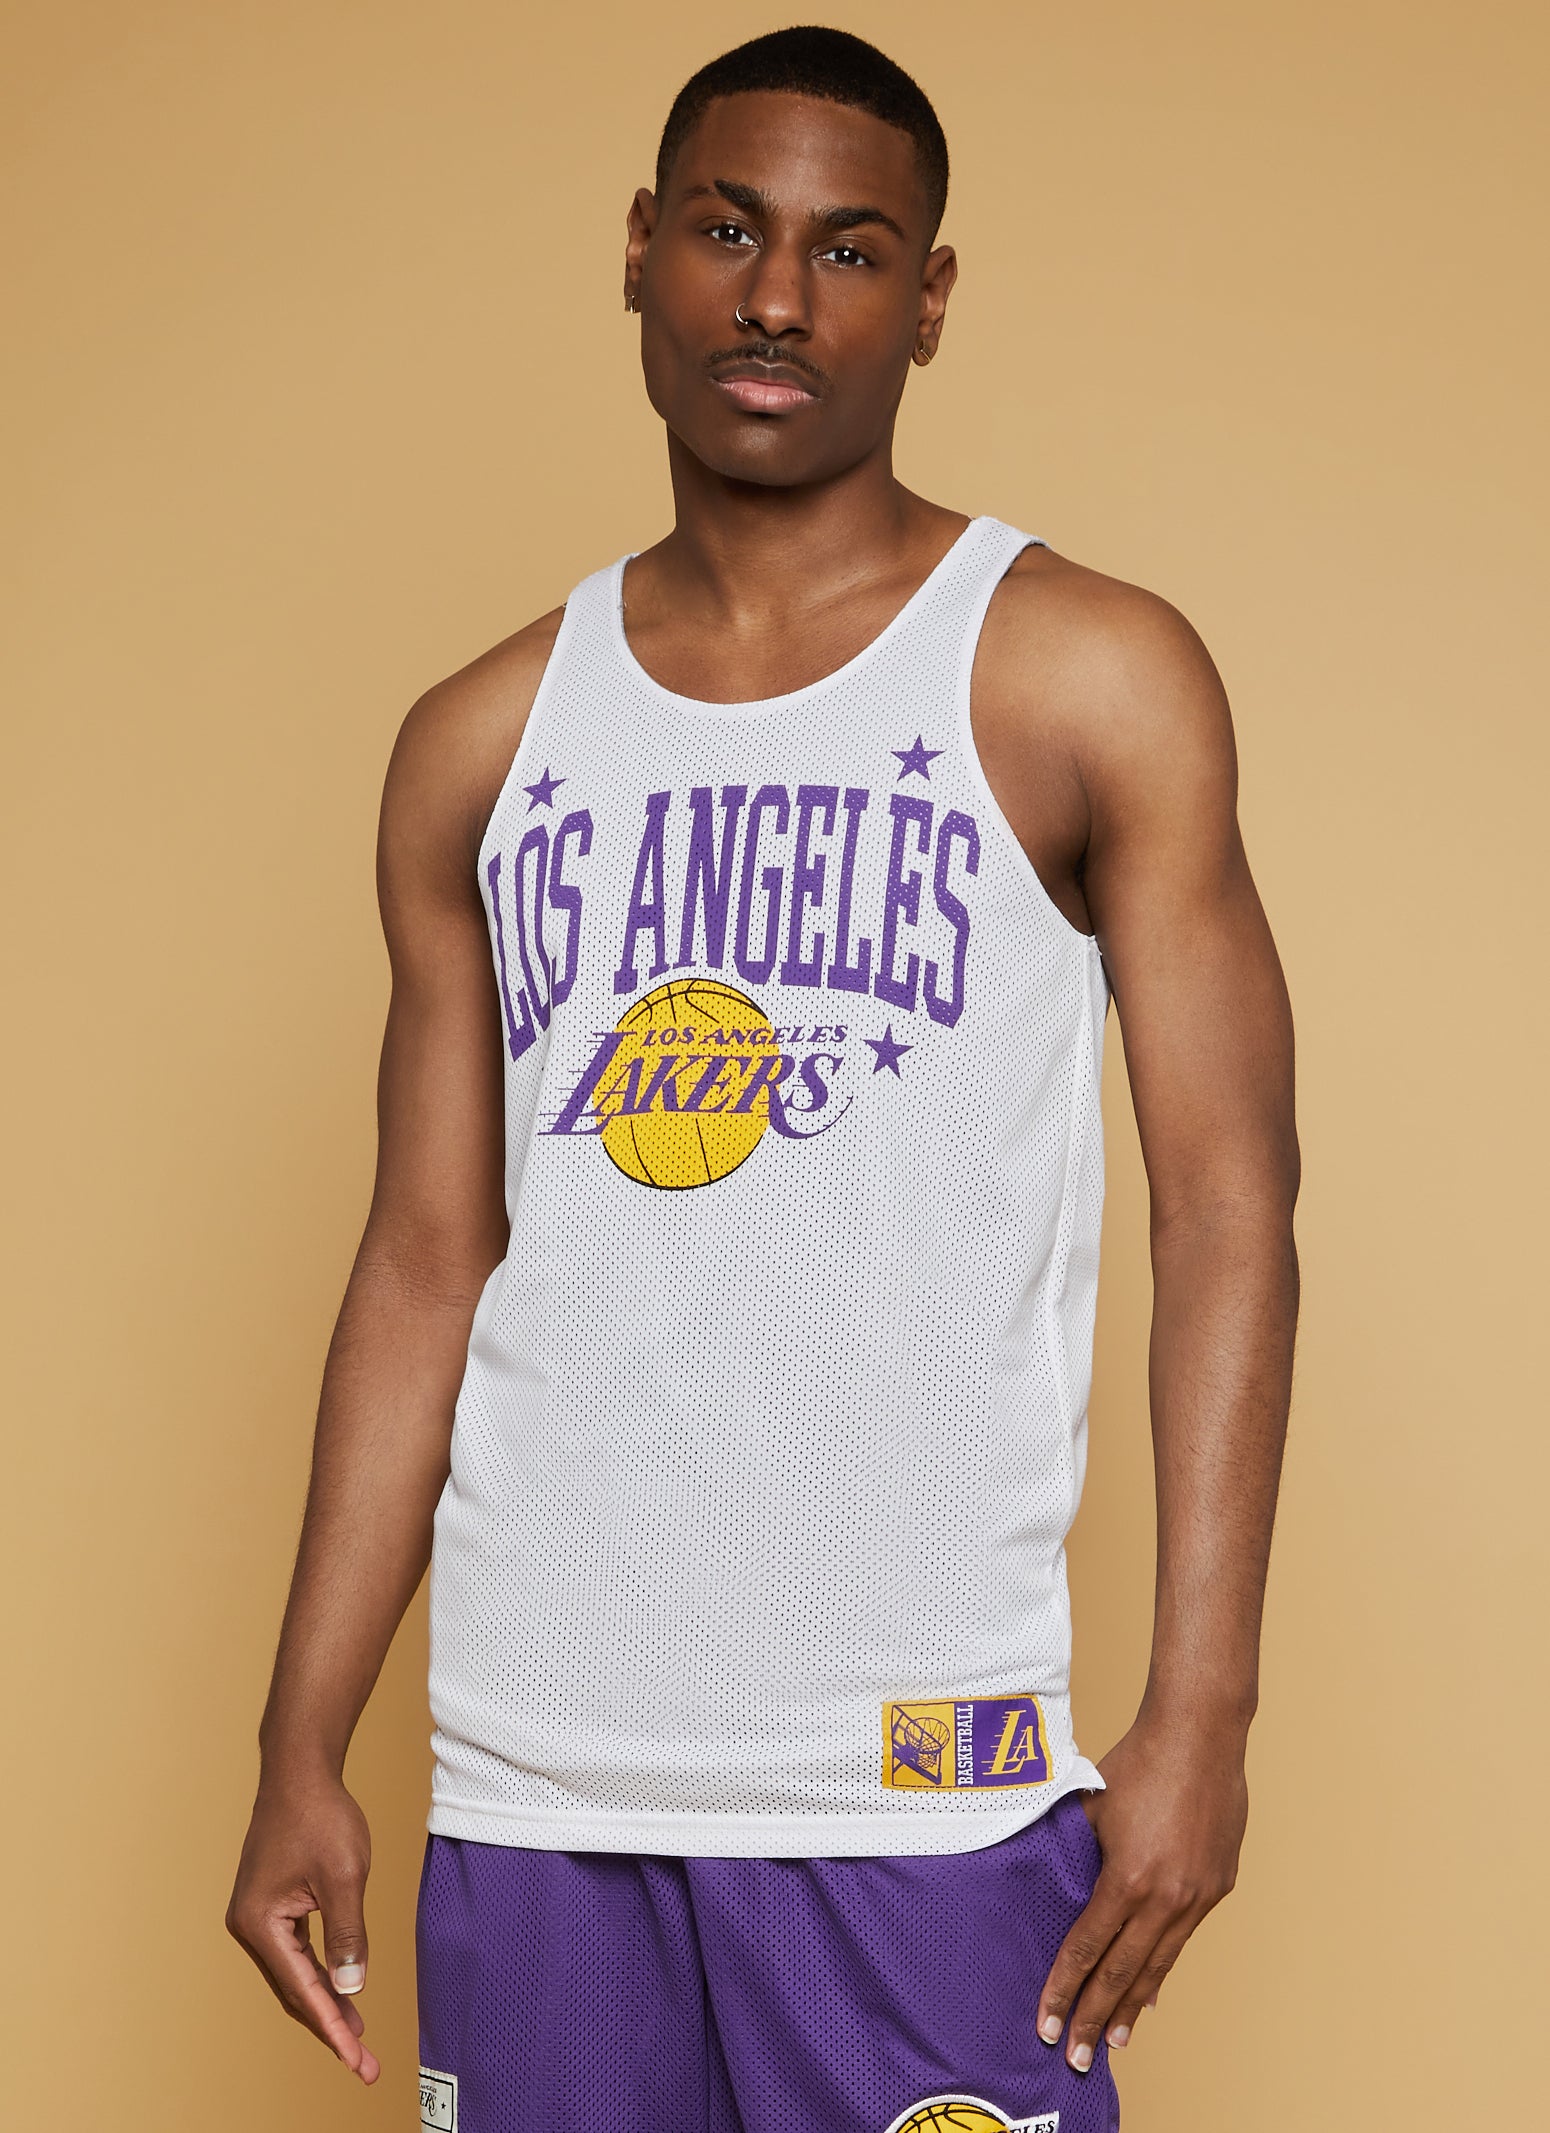 Womens Mens NBA Los Angeles Lakers Graphic Reversible Tank Top, White, Size XL